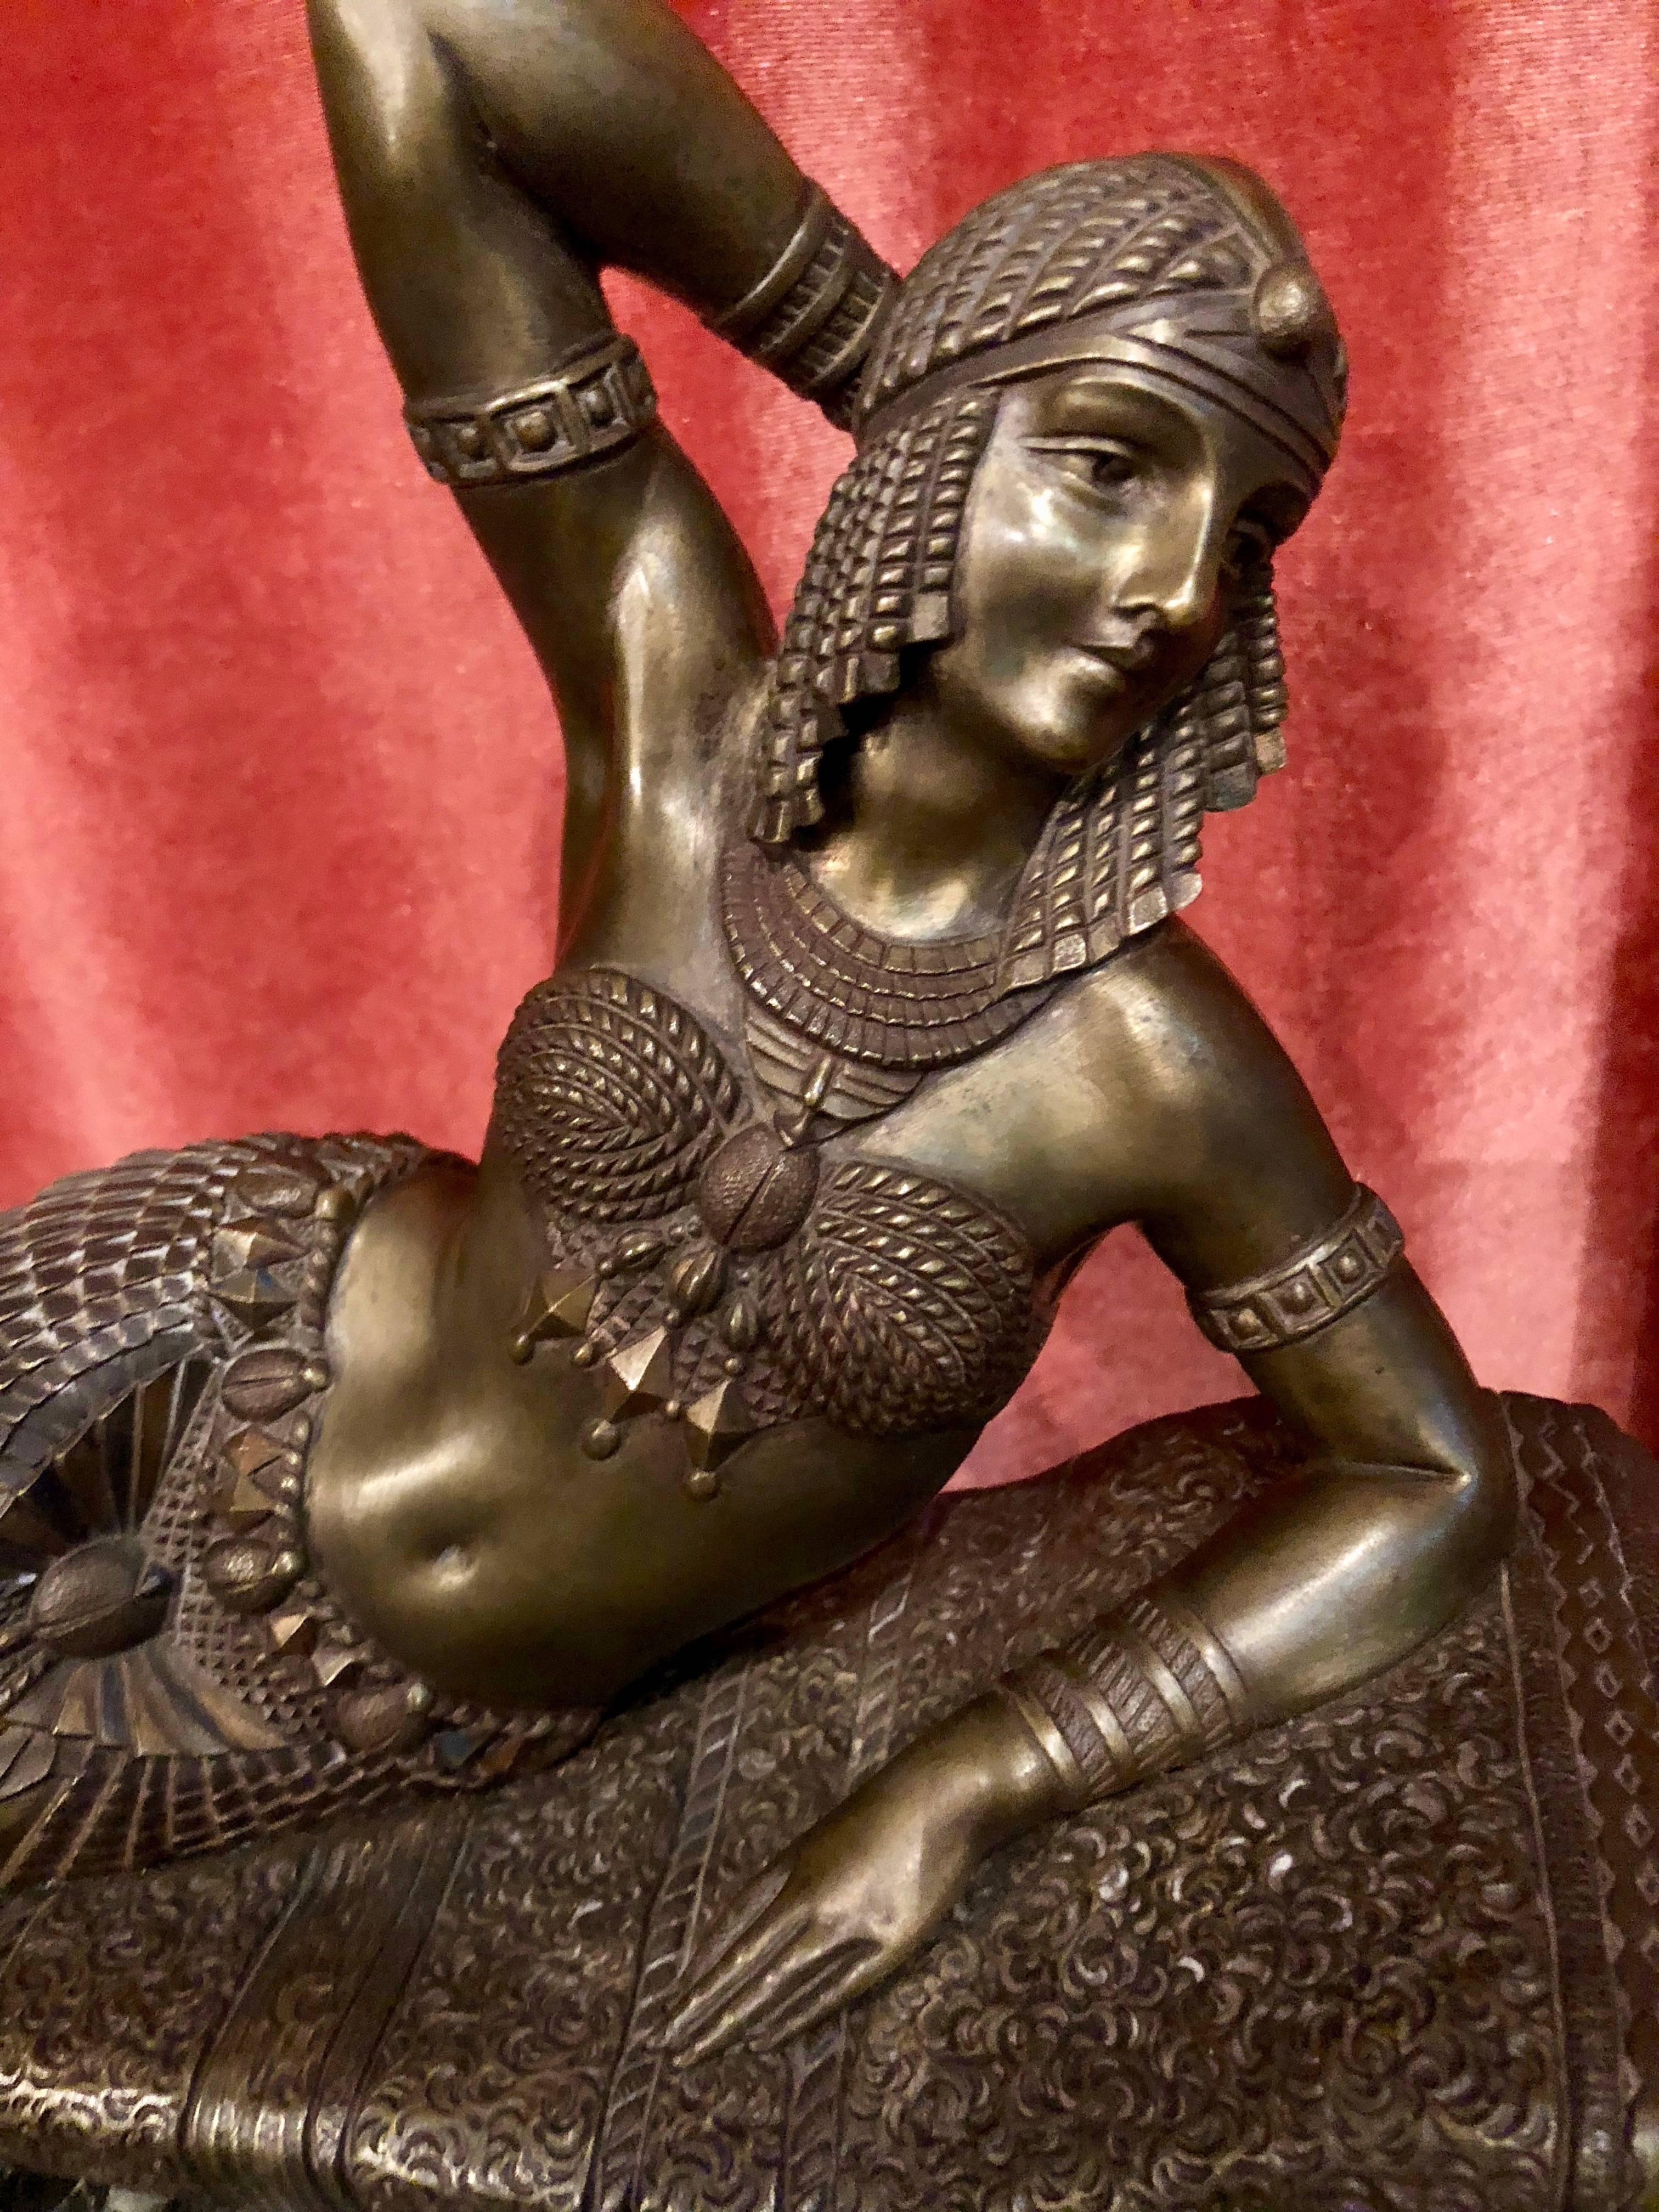 Art Deco Bronze ‘ Cleopatra ‘ by Demetre Chiparus circa 1925 is an extremely important and rare quality statue by the artist who was arguably the master of Art Deco figurative sculpture. Chiparus’s work is in many museums and major collections